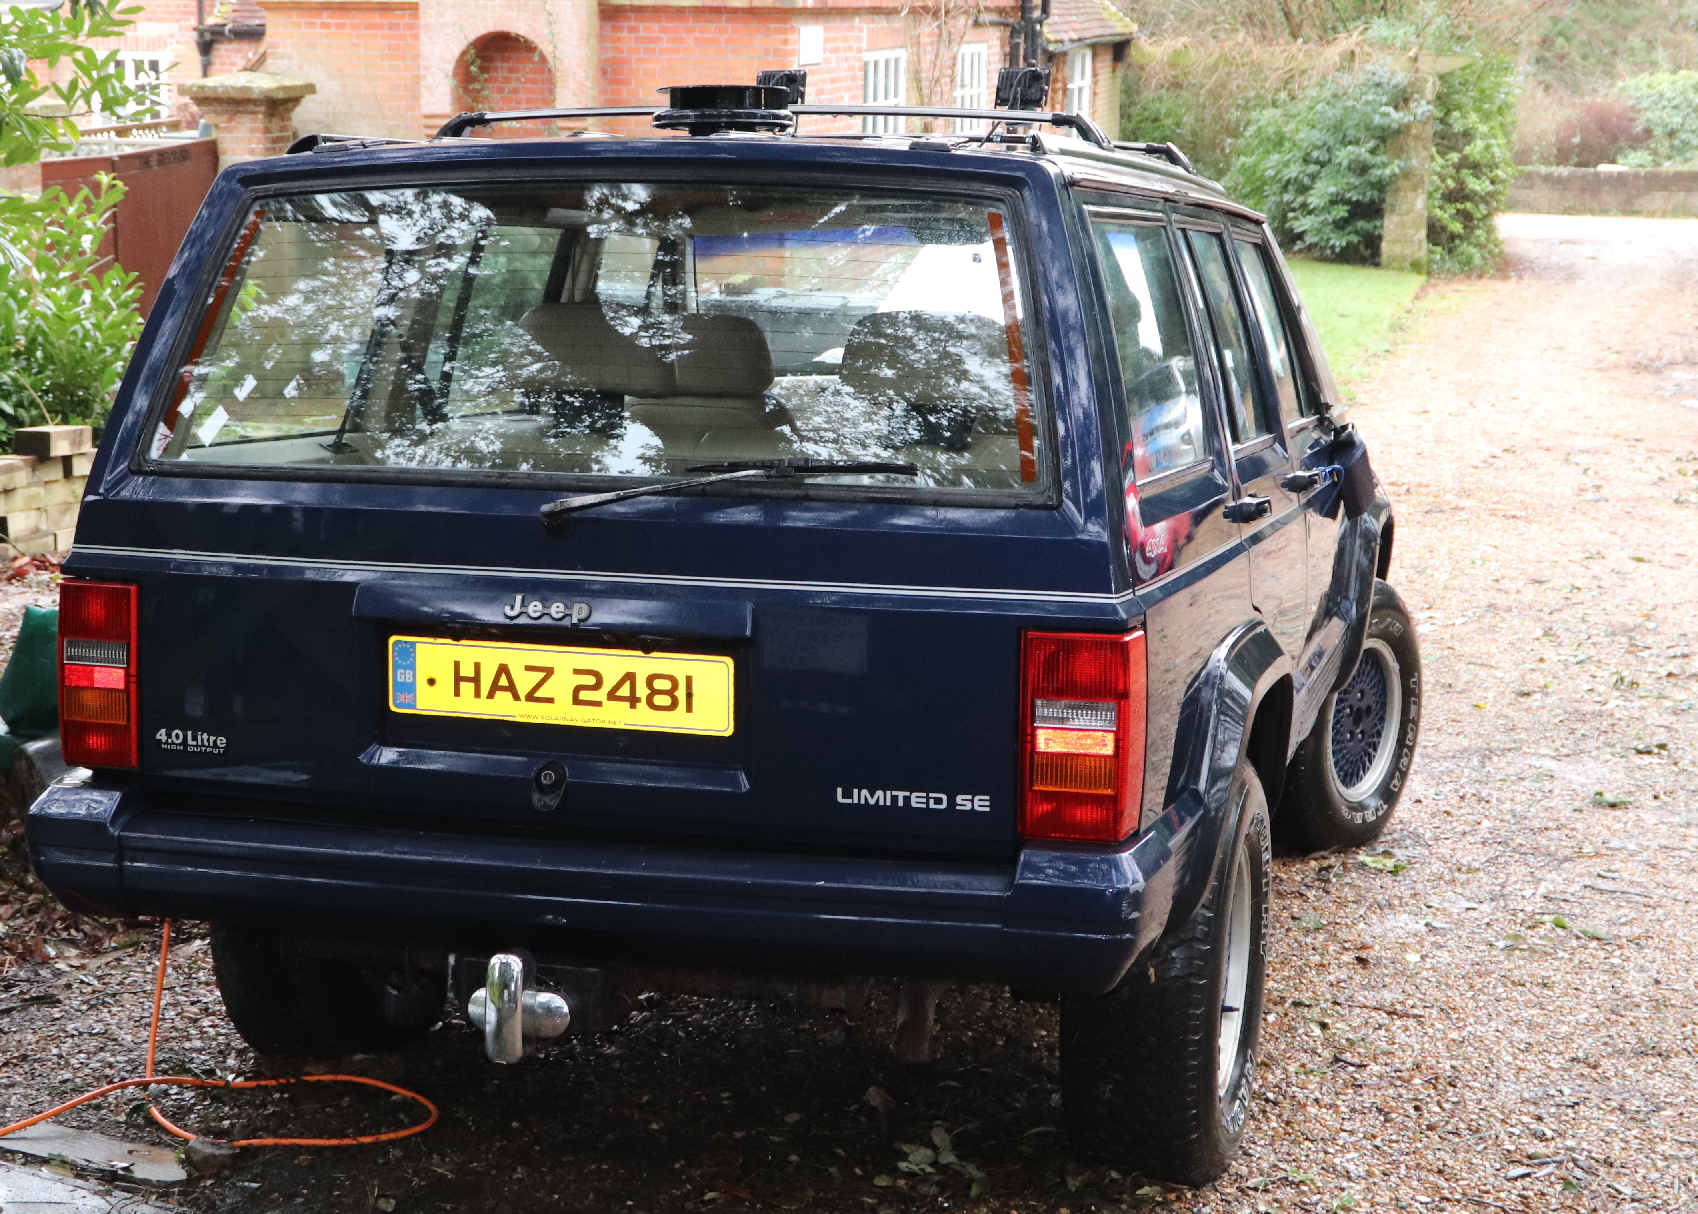 Cherished number plates are quite sought after: HAZ 2481 is valued at 6,599, but is not for sale